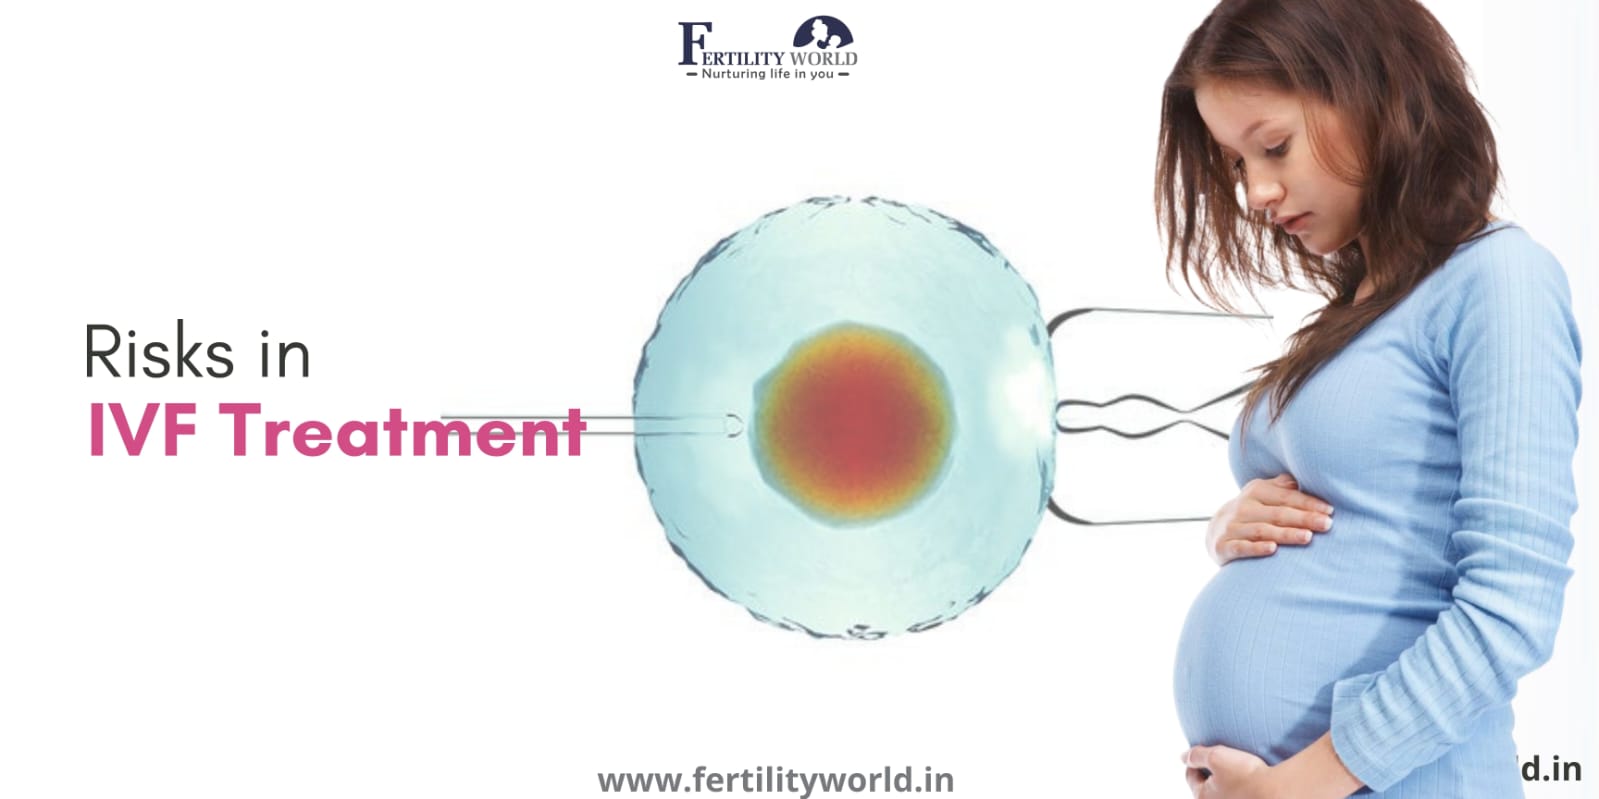 Are there any risks in IVF treatment?